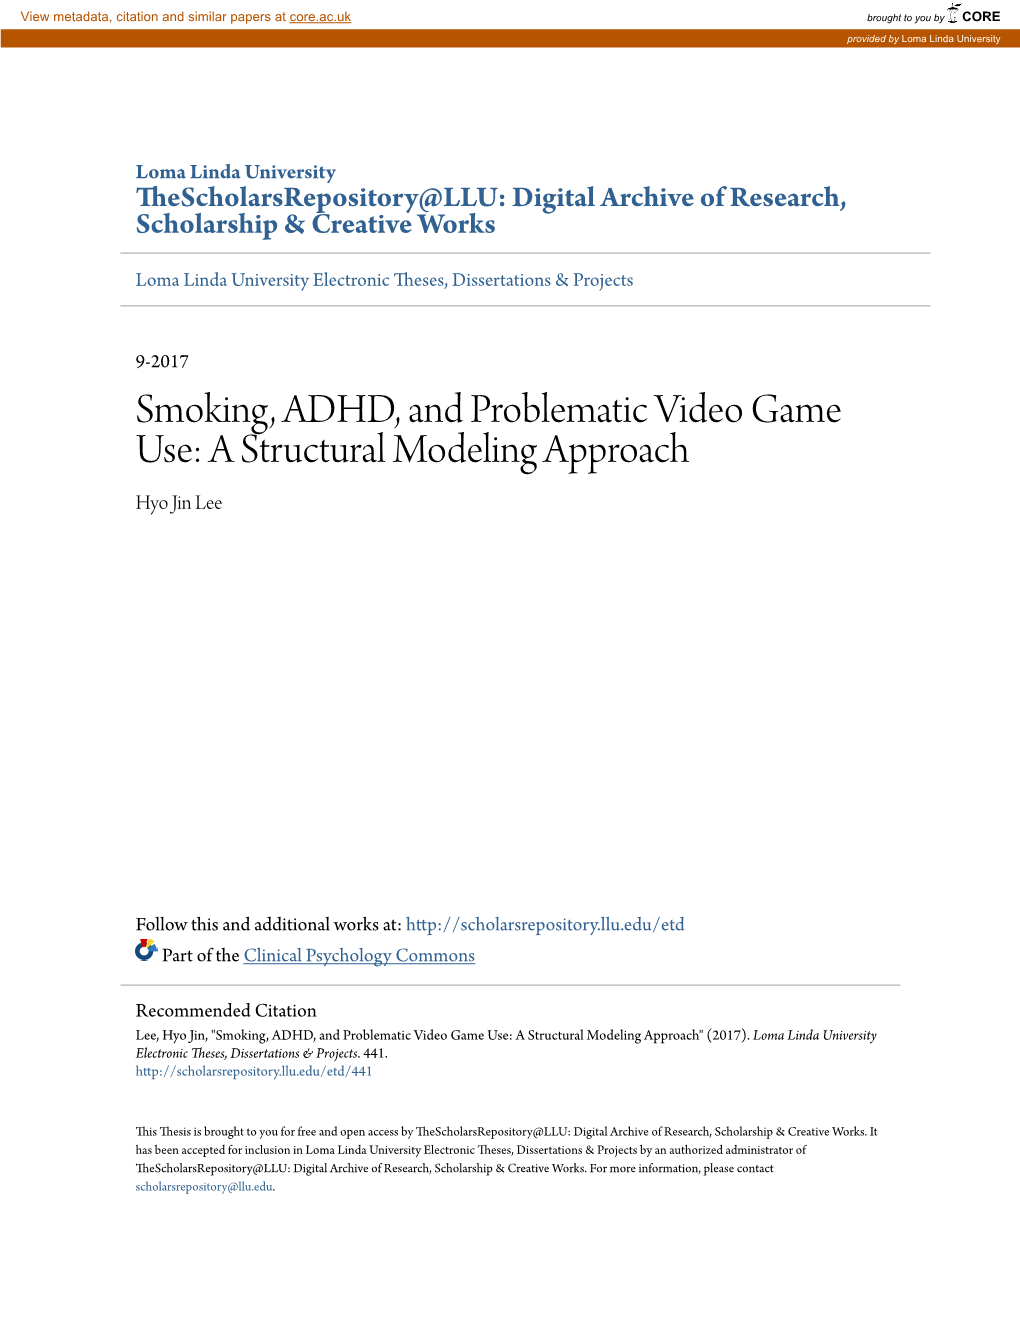 Smoking, ADHD, and Problematic Video Game Use: a Structural Modeling Approach Hyo Jin Lee